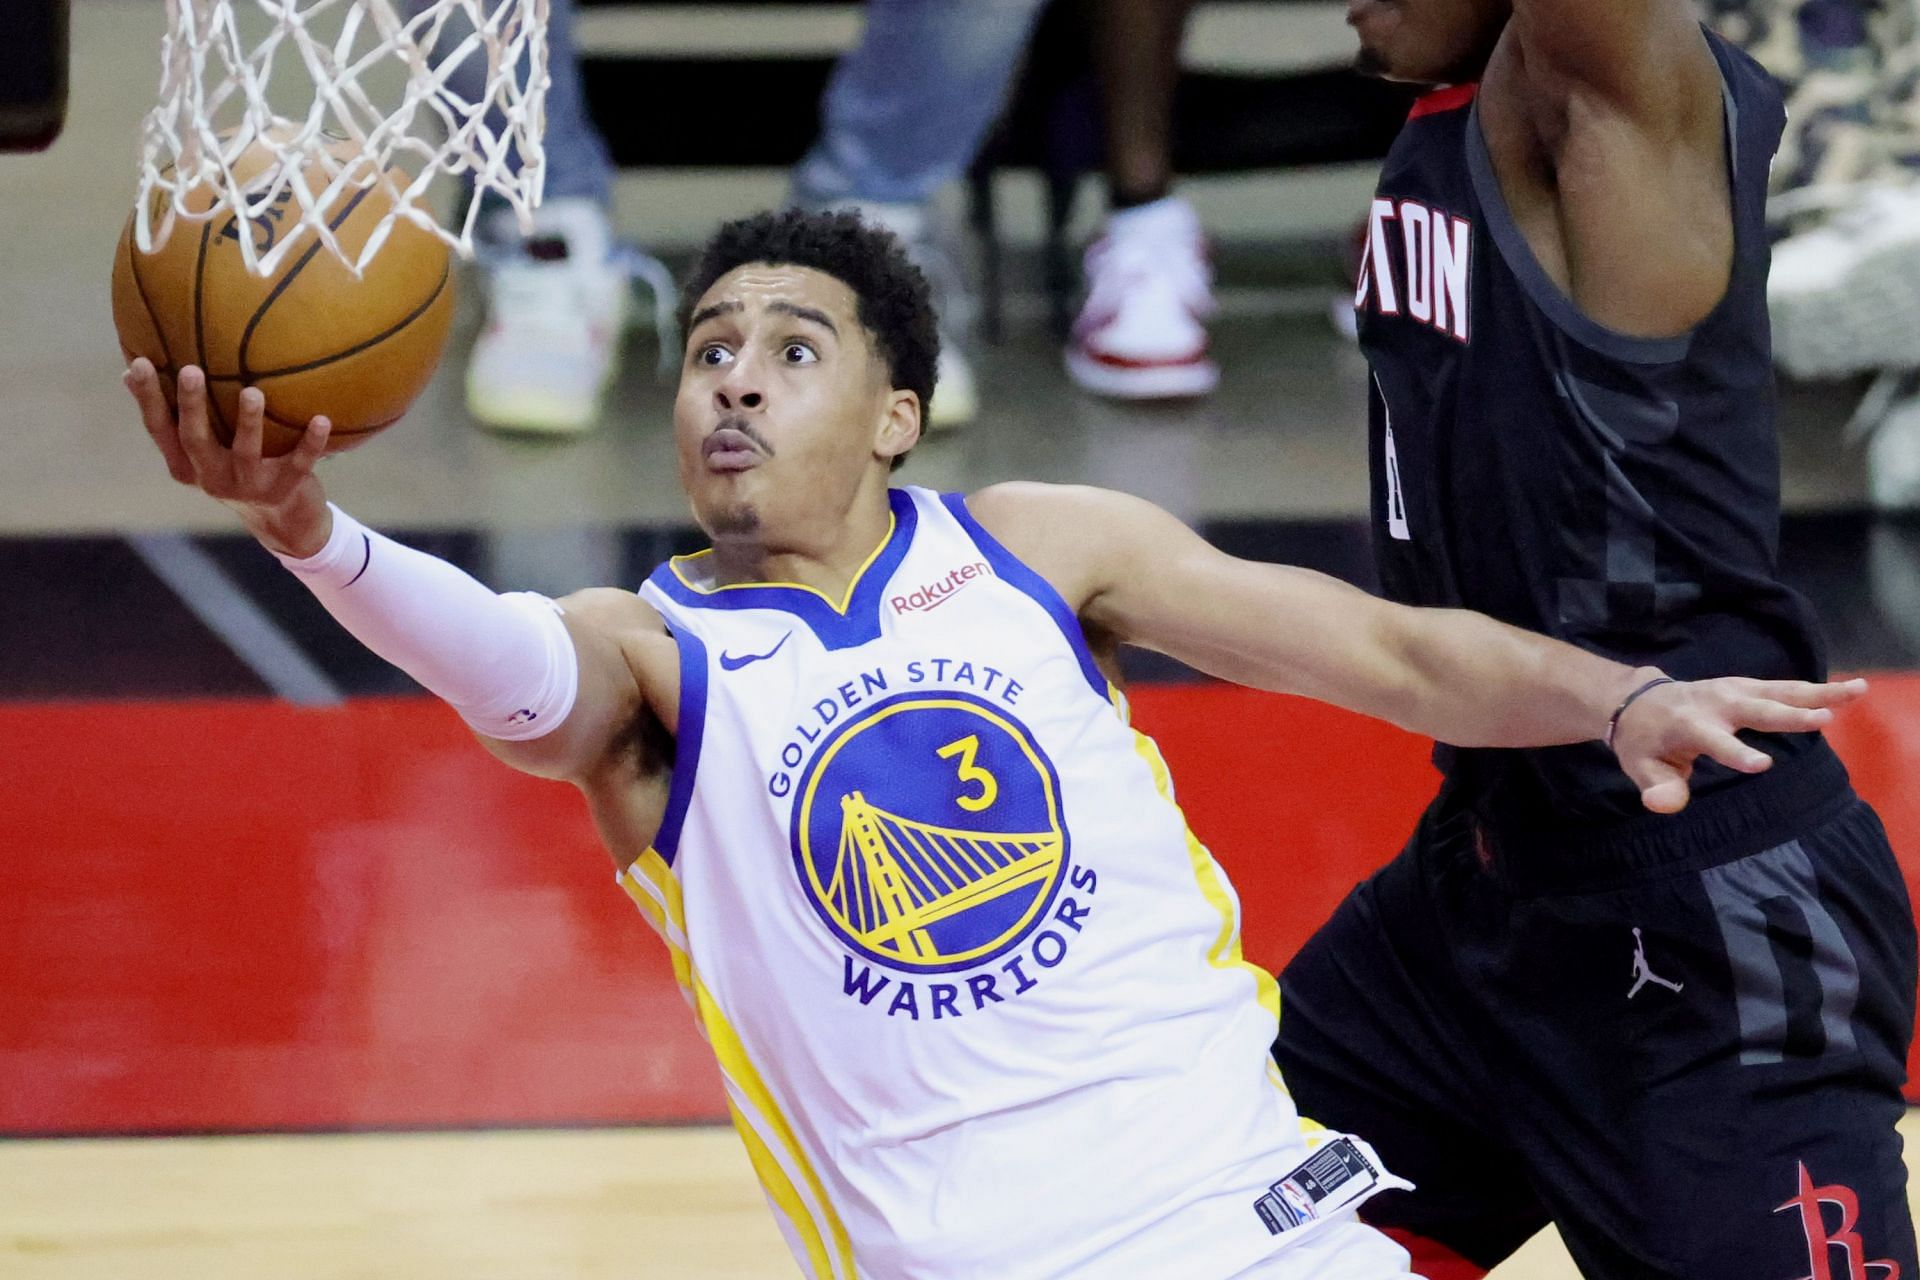 Golden State Warriors youngster Jordan Poole goes up for a reverse layup